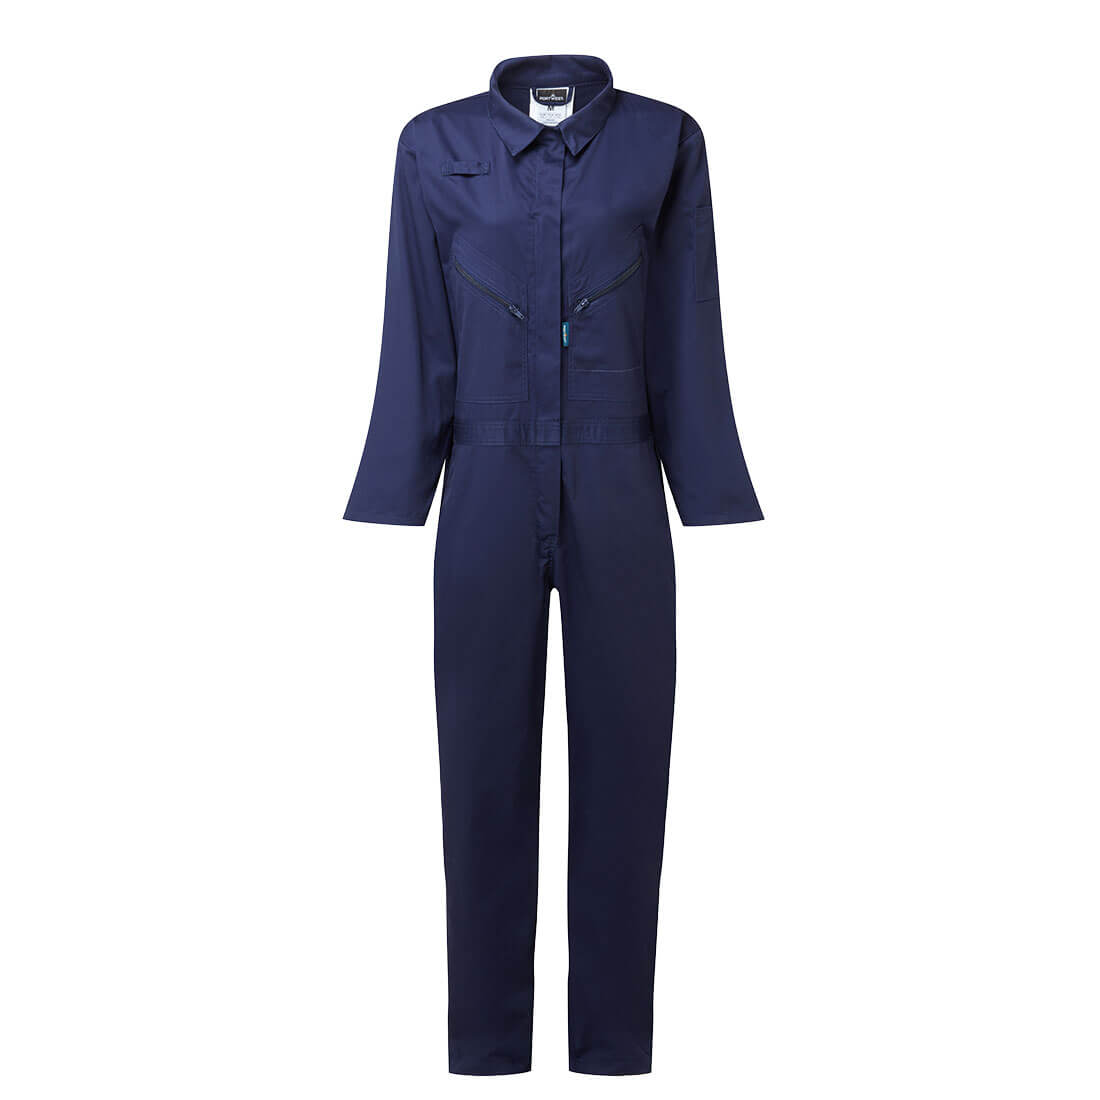 Portwest C184 Women's Coverall for Women's Workwear